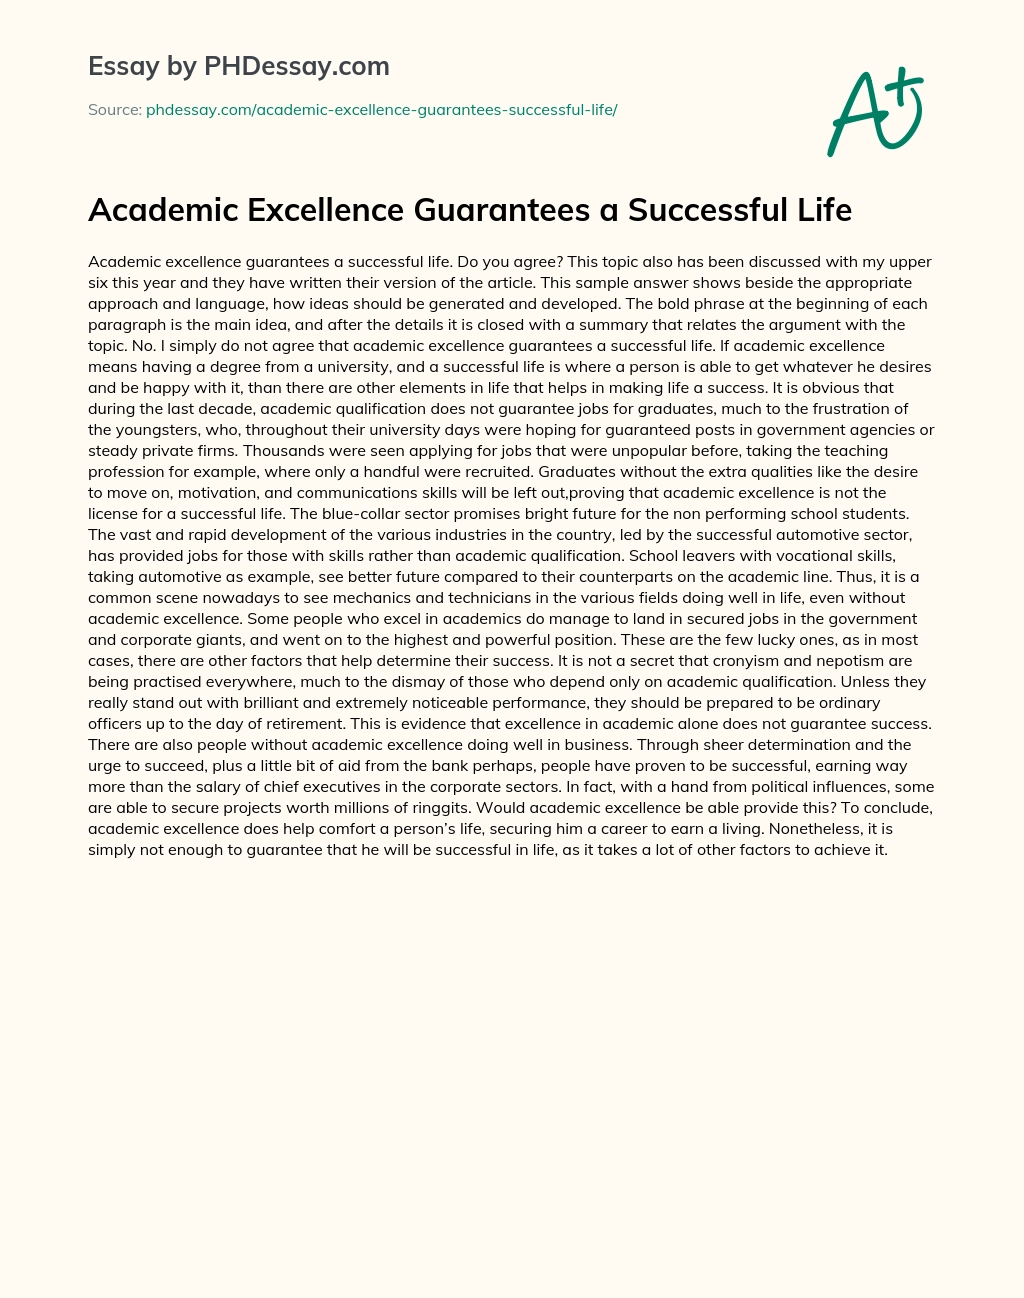 Academic Excellence Guarantees a Successful Life essay